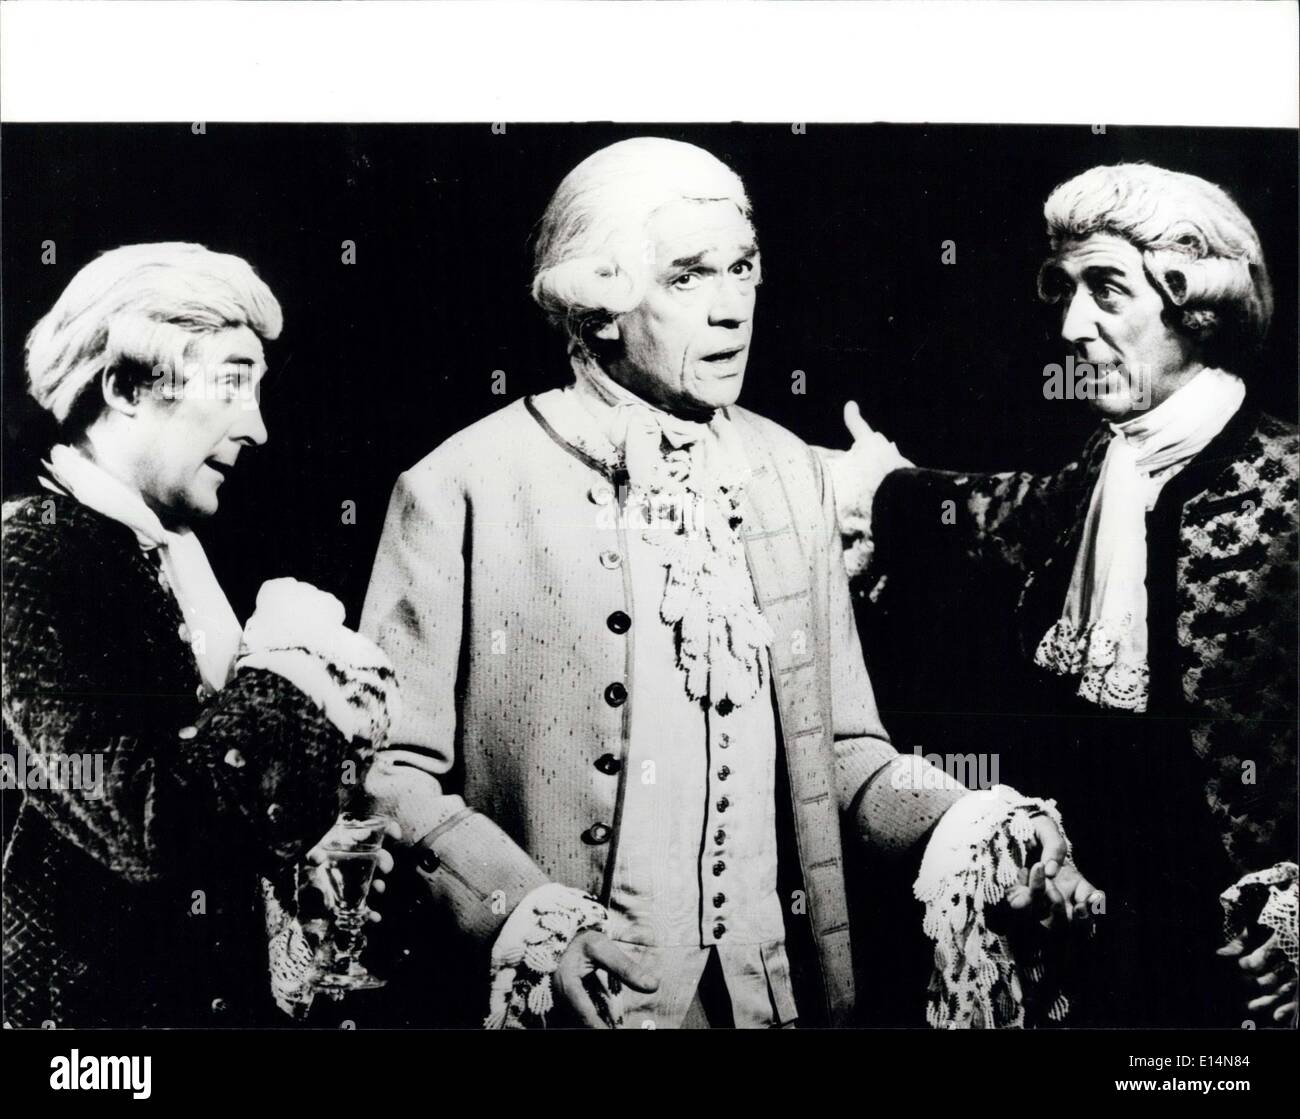 Apr. 05, 2012 - Paul Scofield in Amadeus at the the Olivier Theatre: The National Theatre production of Peter Shaffer's new play Amadeus at the Olivier Theatre, South Bank, London. Directed by Peter Hall with design and lighting by John Bury, music by Mozart and Salieri Photo shows Three of the cast L-R. Dermot Crowley (Venicello) Paul Scotfield (Antonio Salieri) and Donald Gee (Venticello) Stock Photo